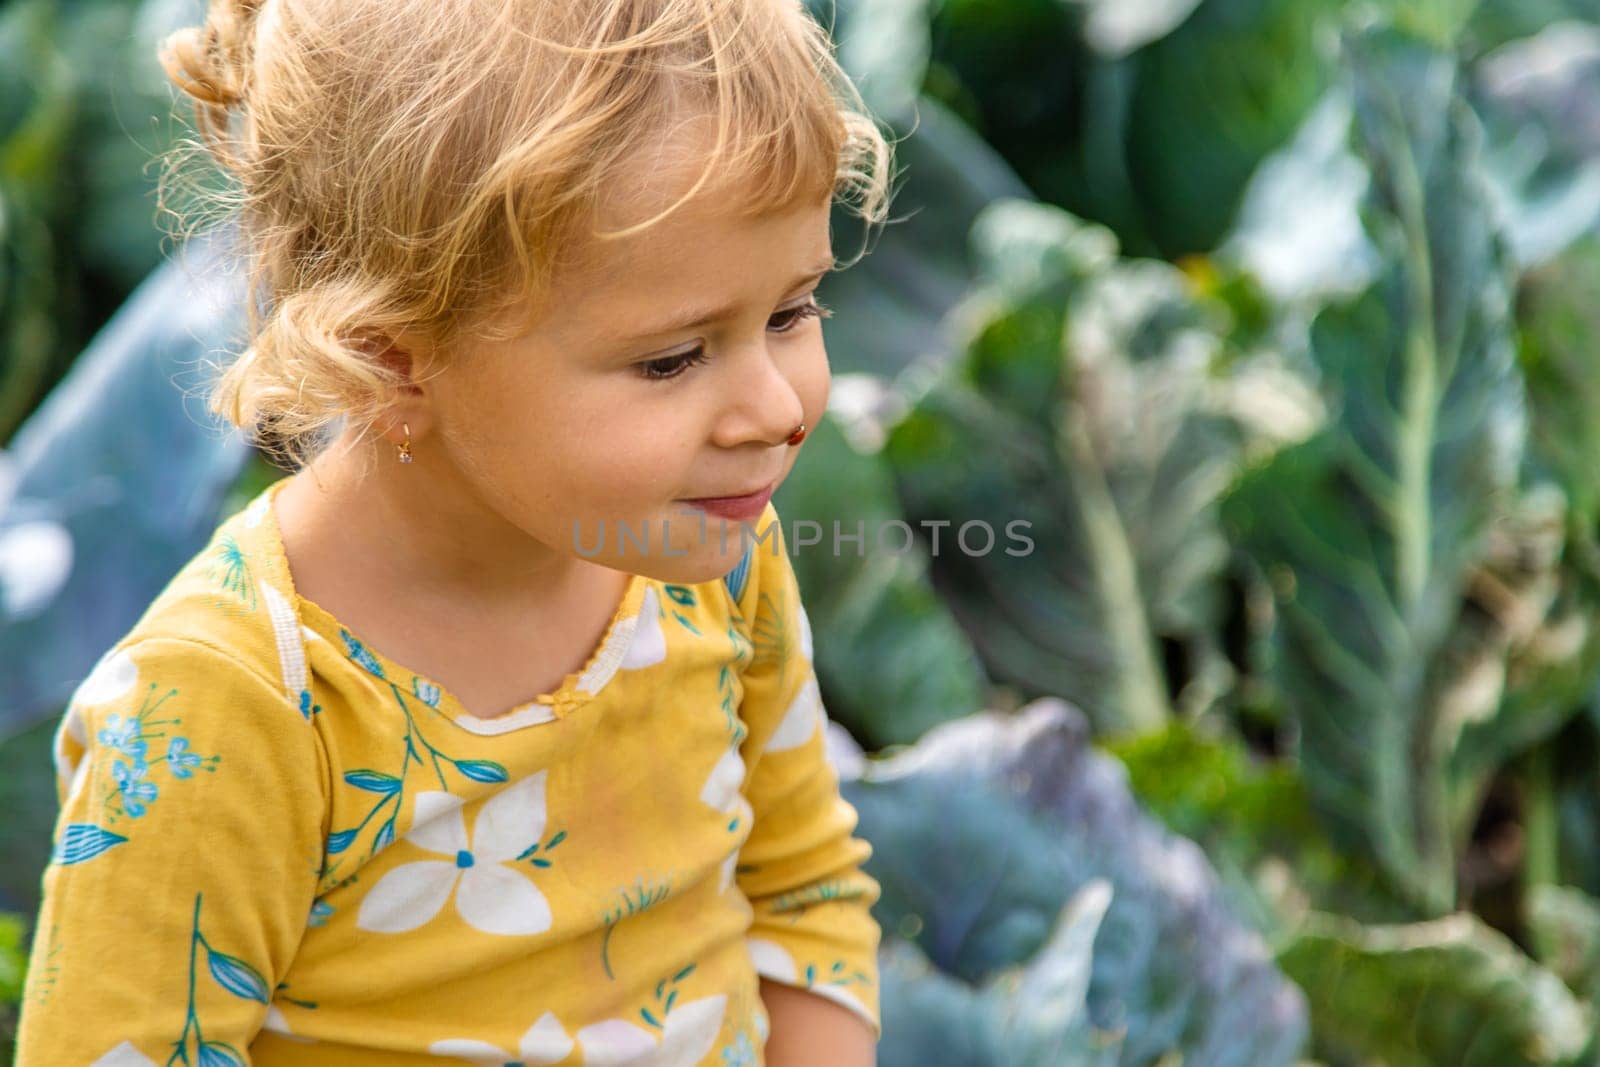 the child holds a ladybug in his hands. Selective focus. nature.